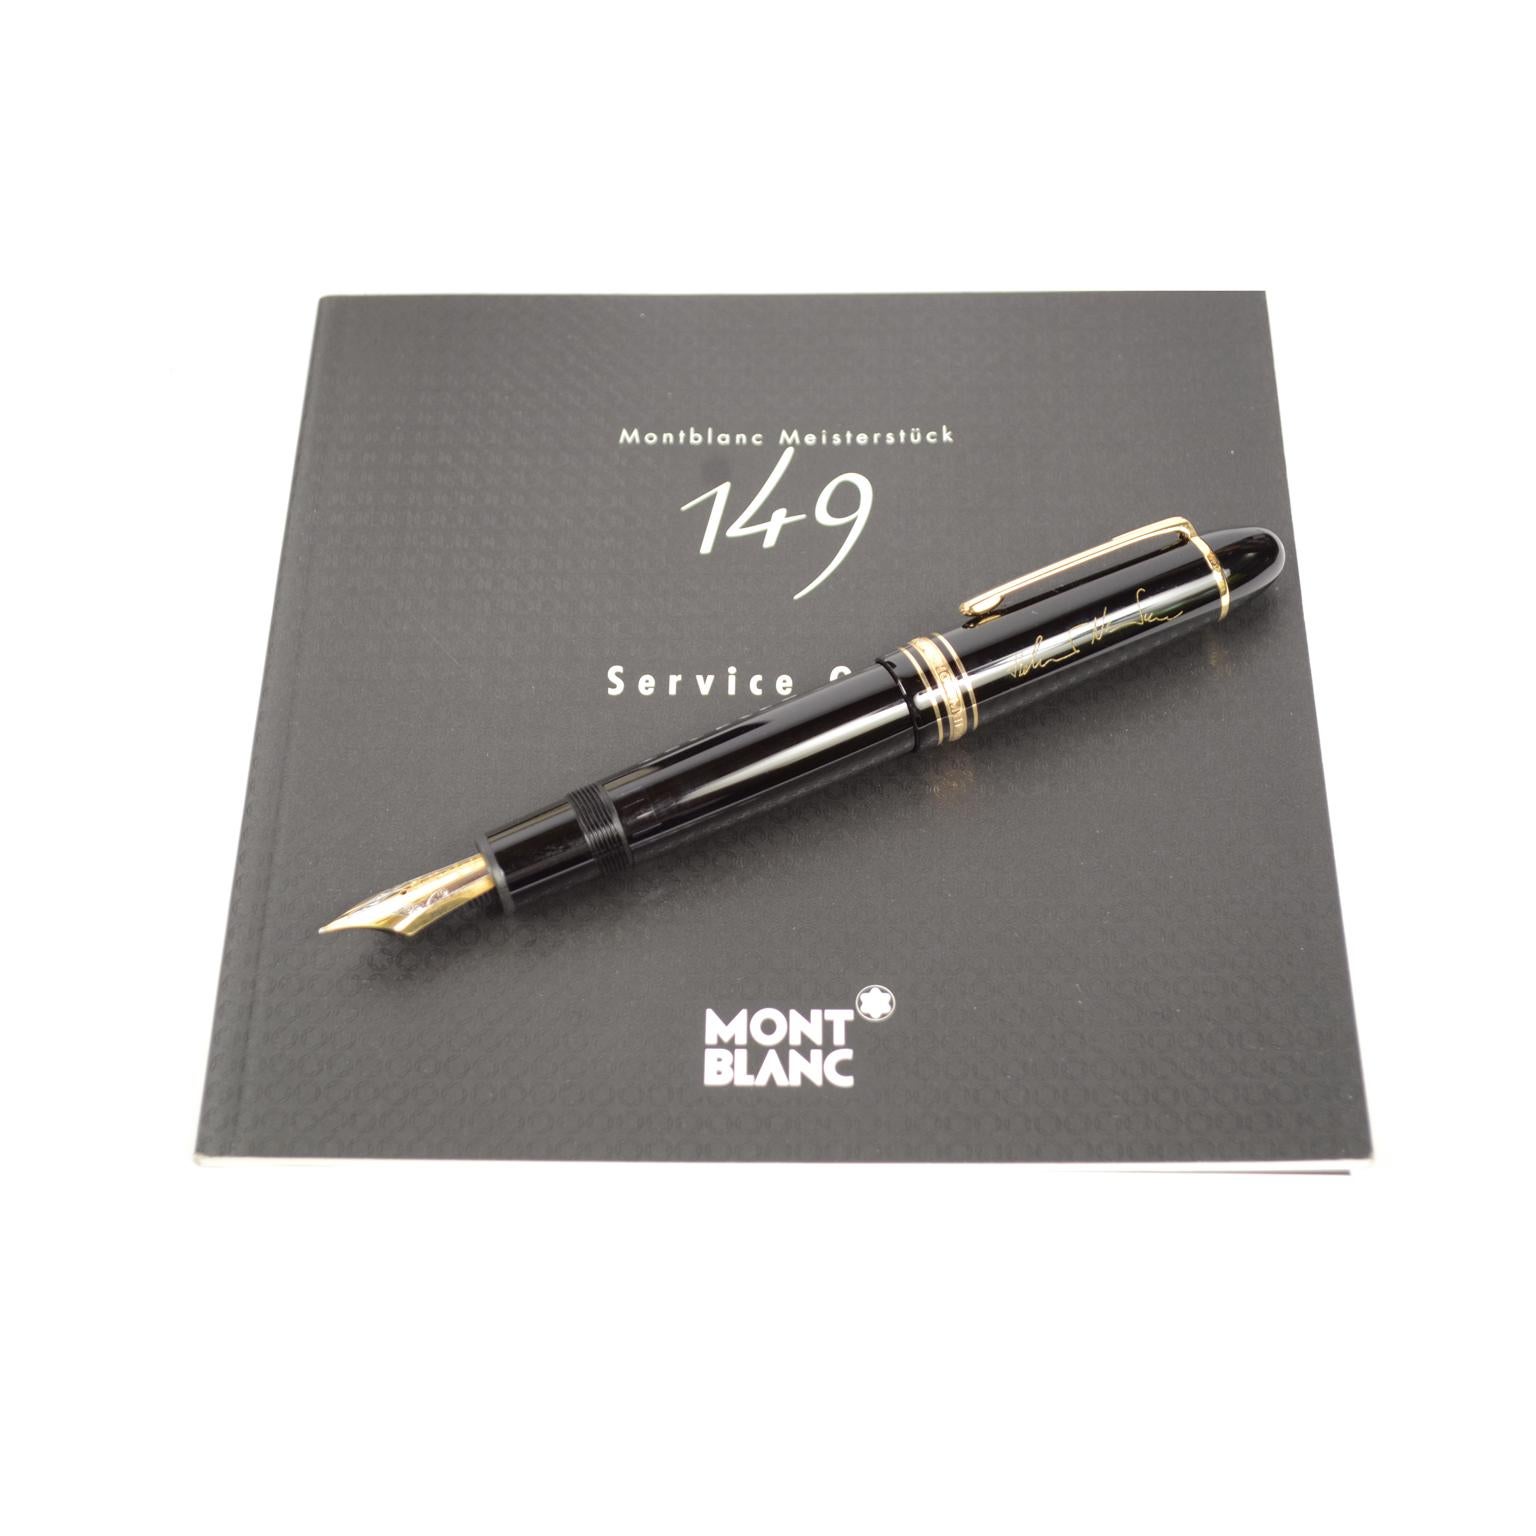 Late 20th Century Mm Mont Blanc Meisterstuck 149 Signed by Helmut Newton